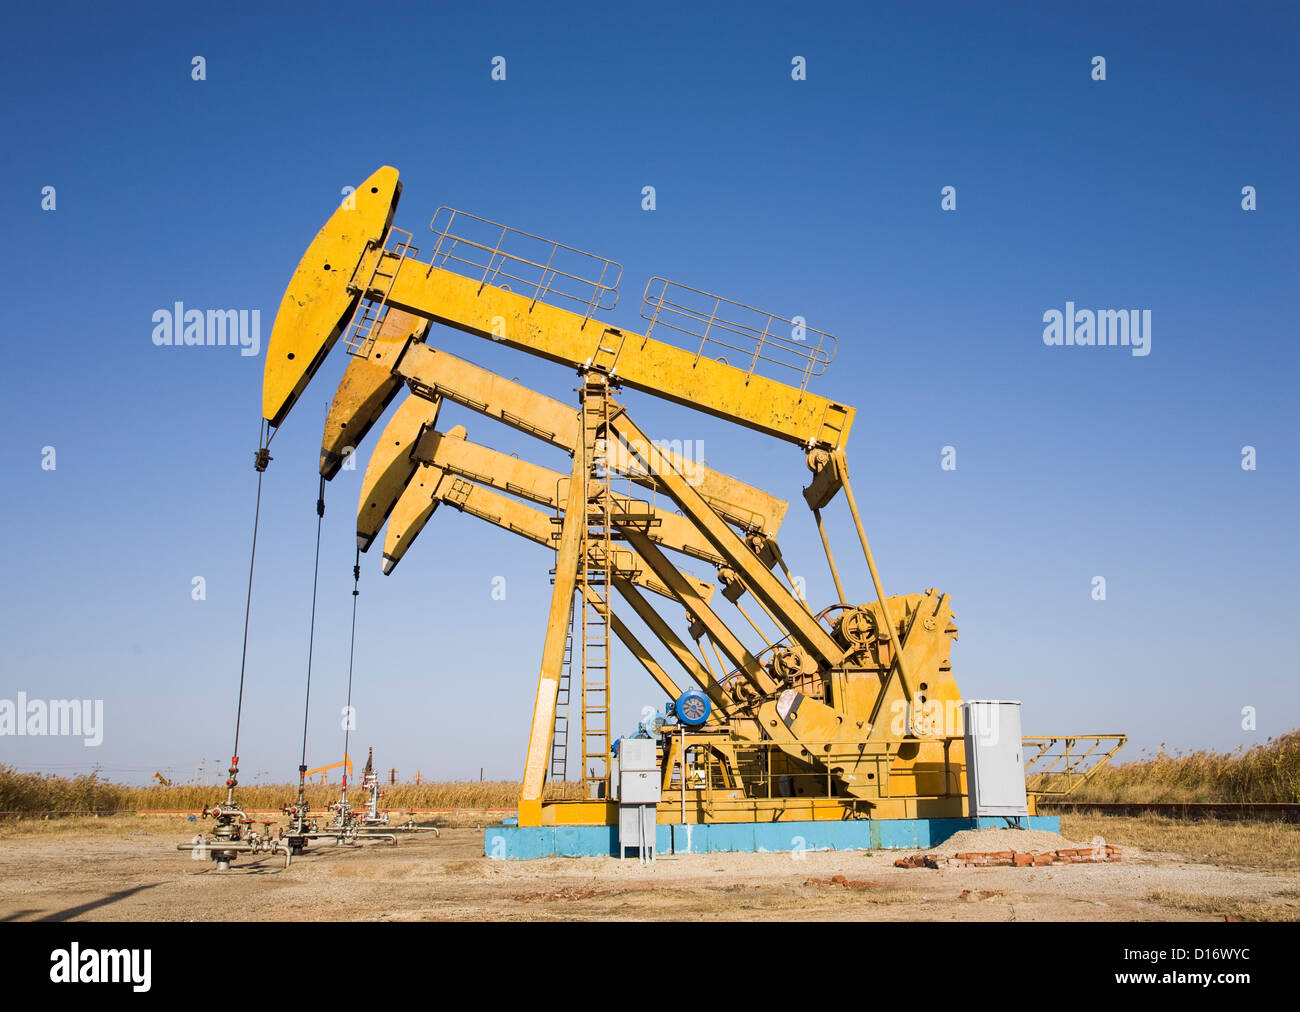 Pumping oil machines Stock Photo